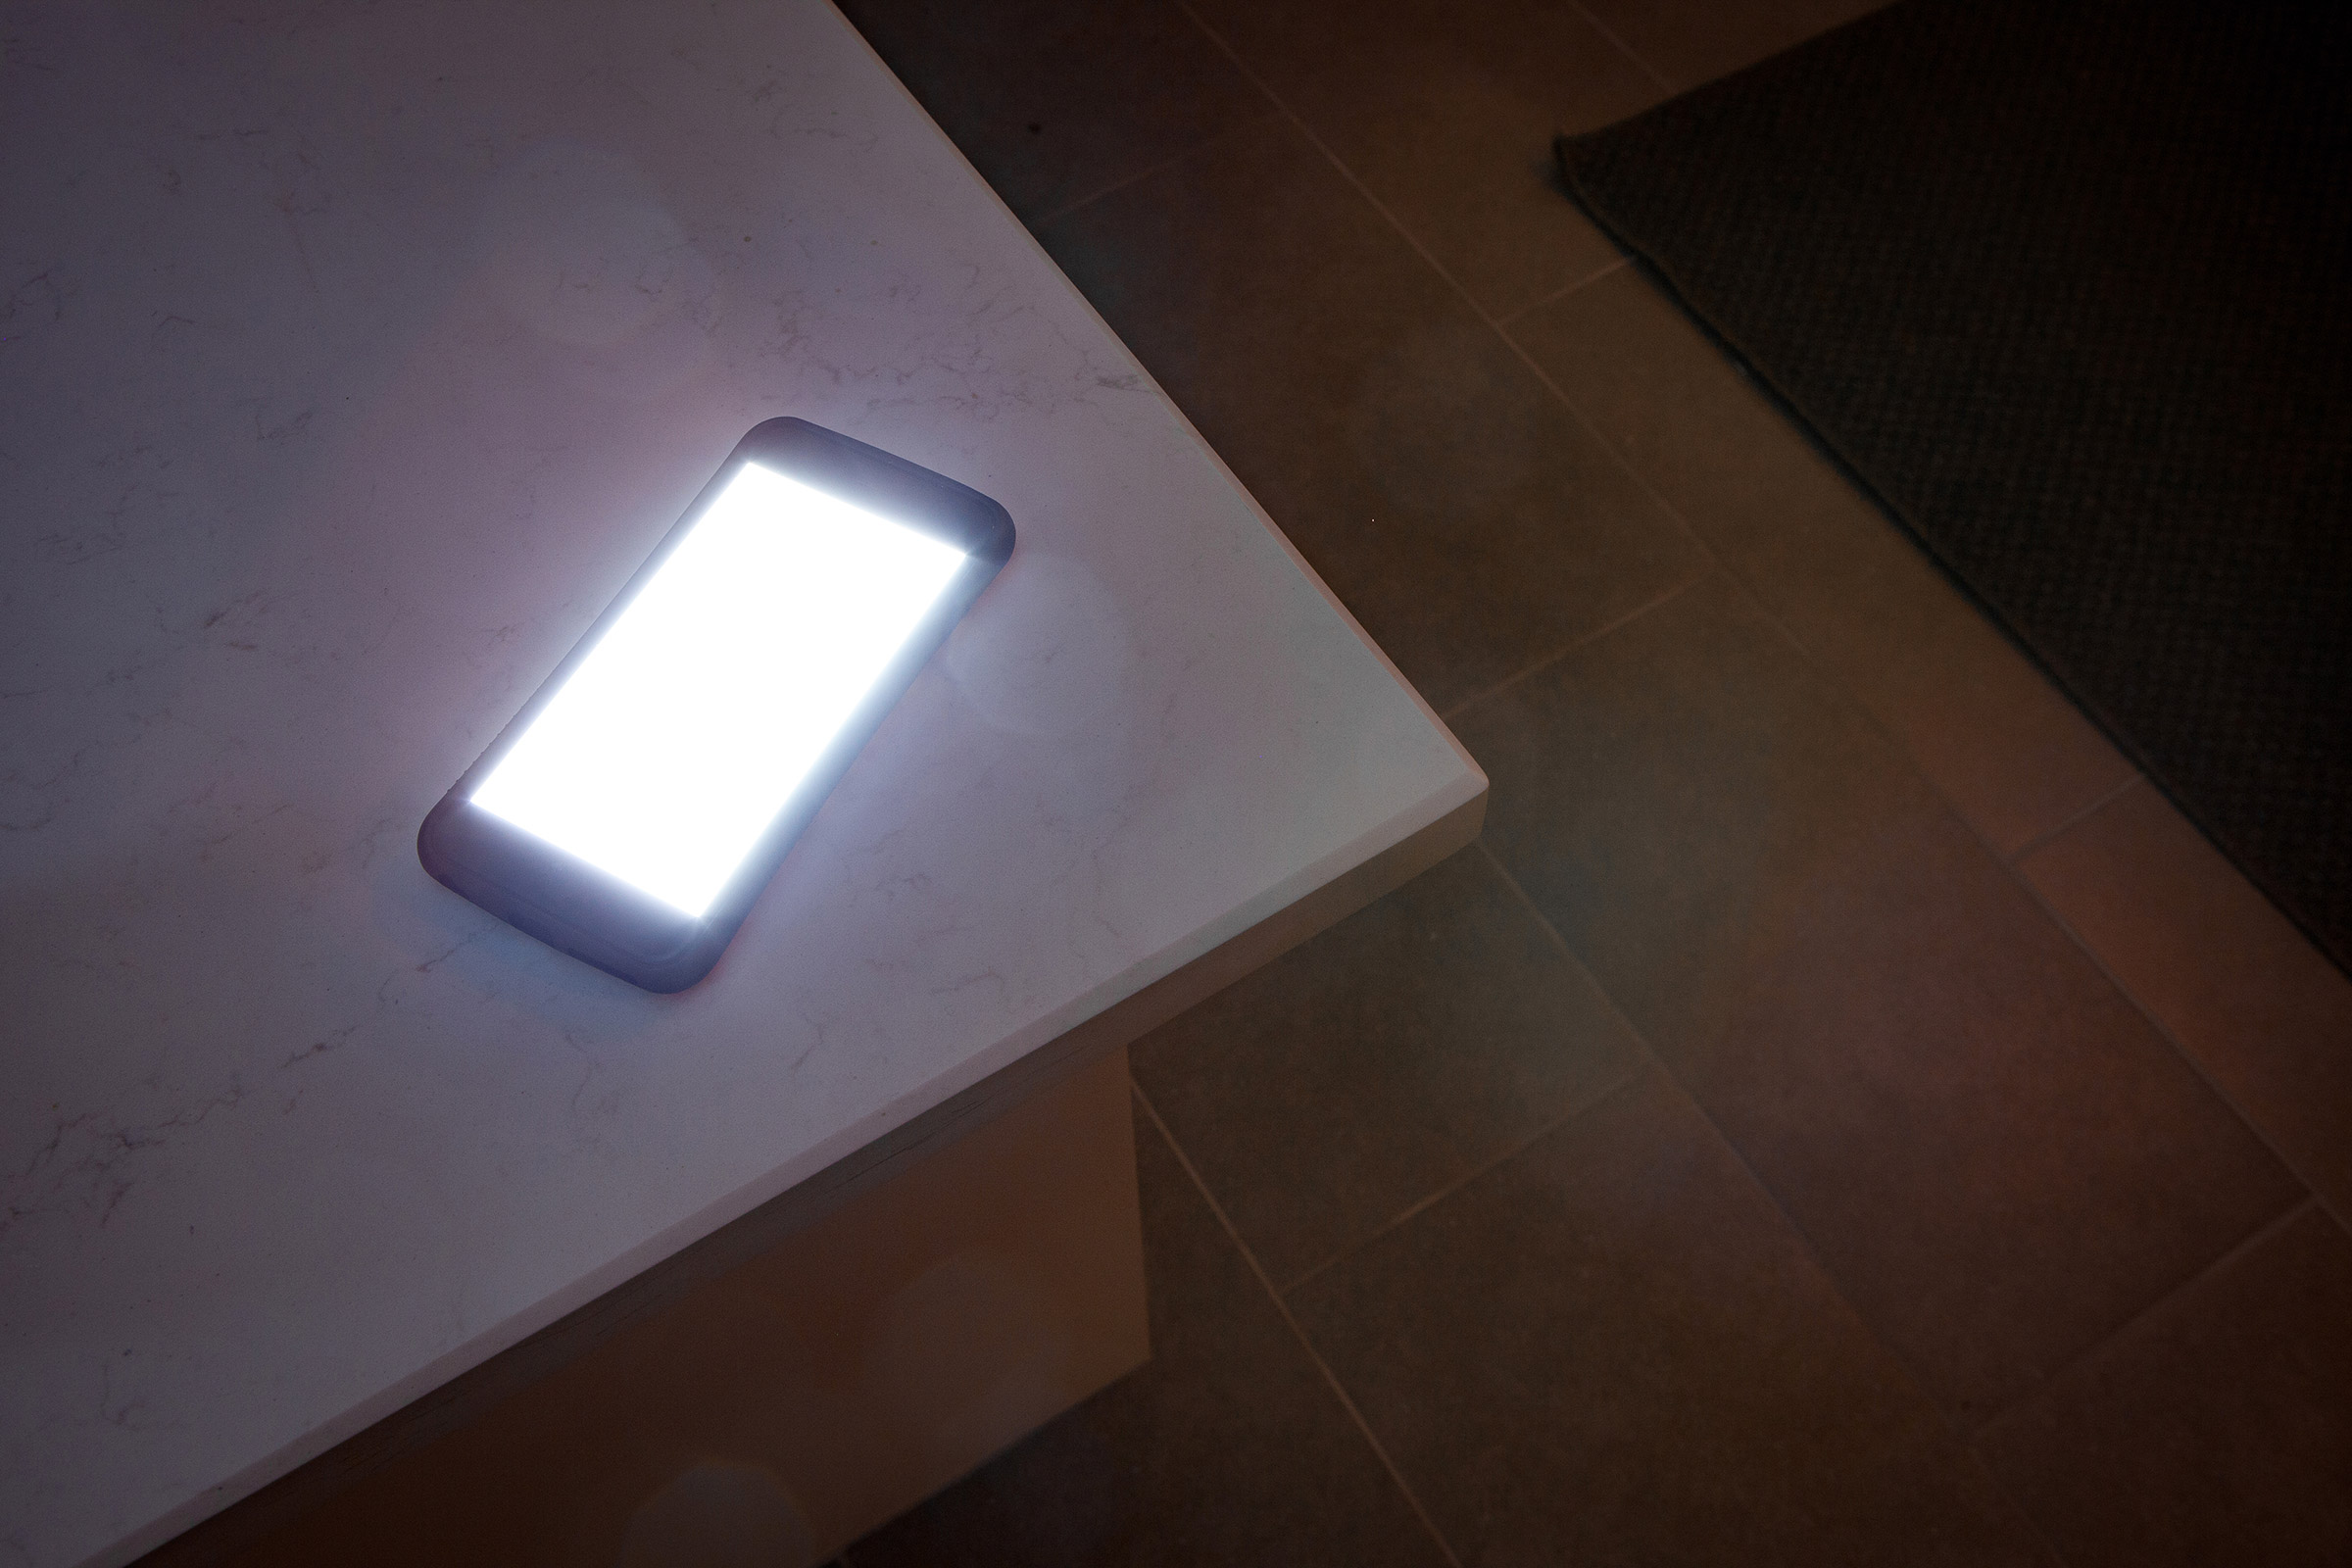 Glowing smartphone on countertop at night